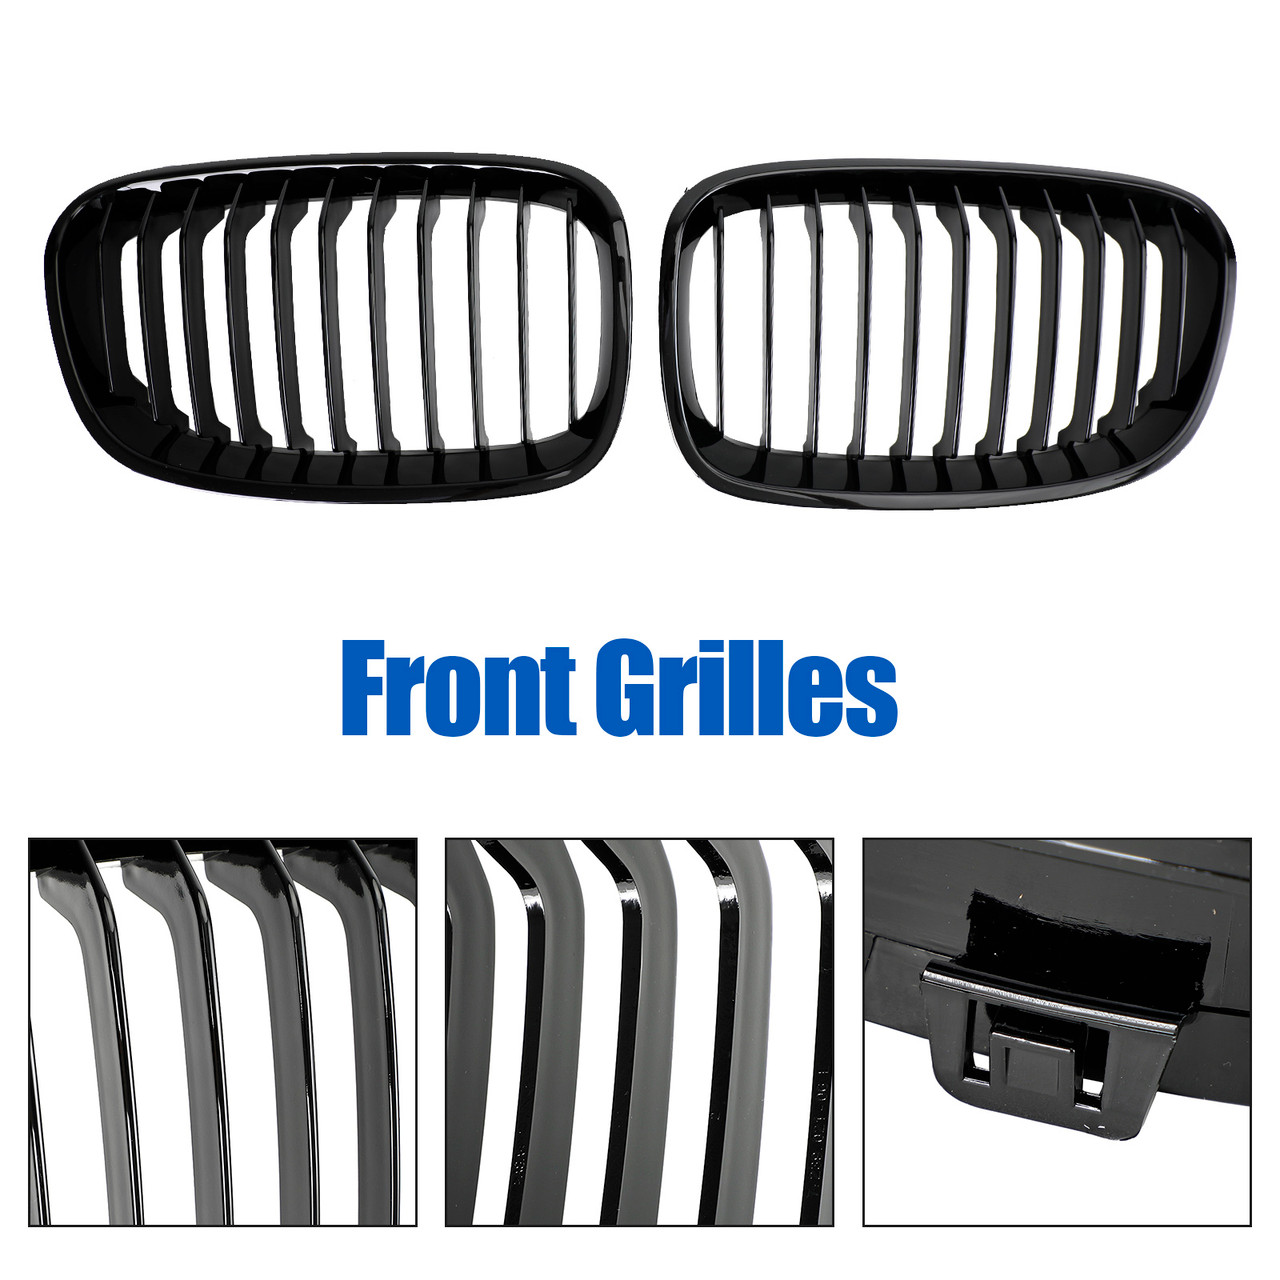 2PCS Front Bumper Kidney Grill Grille Fit BMW 1 Series F20 F21 2012-2014